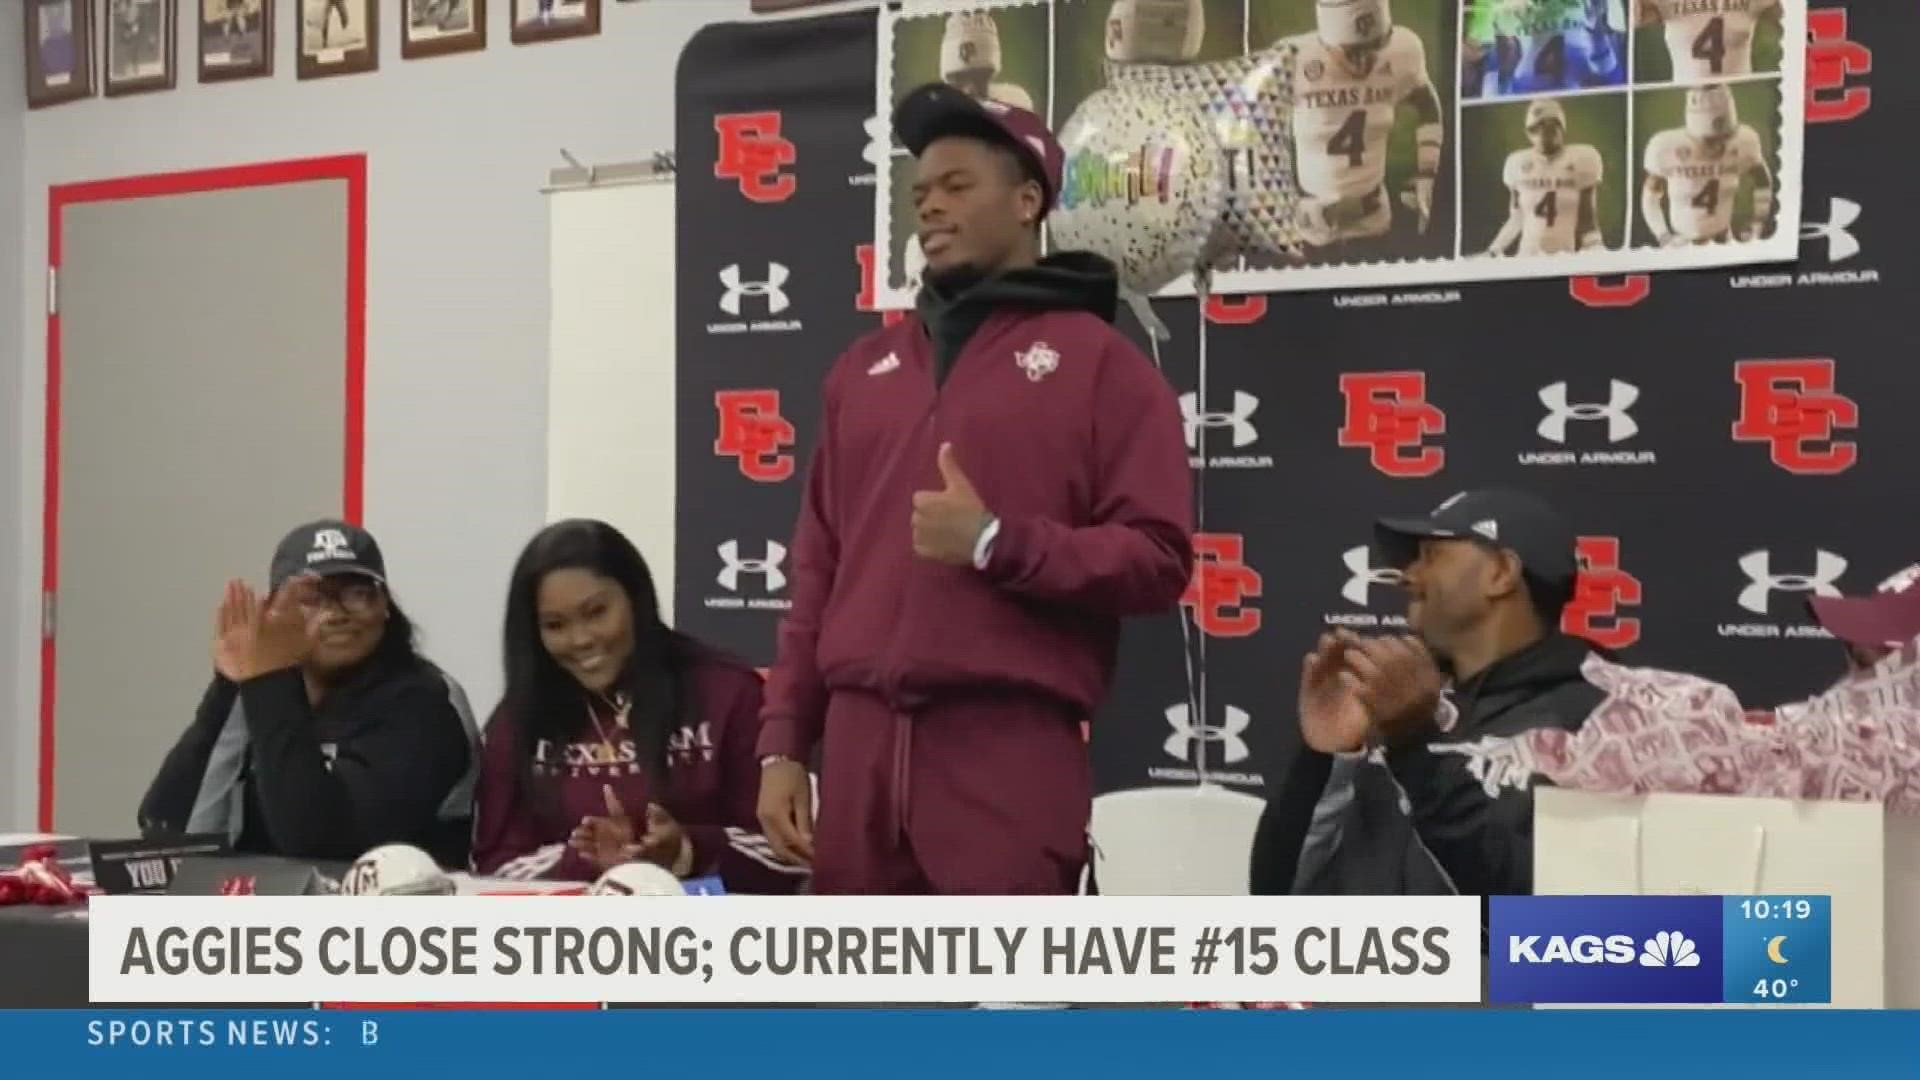 Head coach Jimbo Fisher and the Aggies closed strong during the early signing period. As it stands right now, A&M has the #14 class.